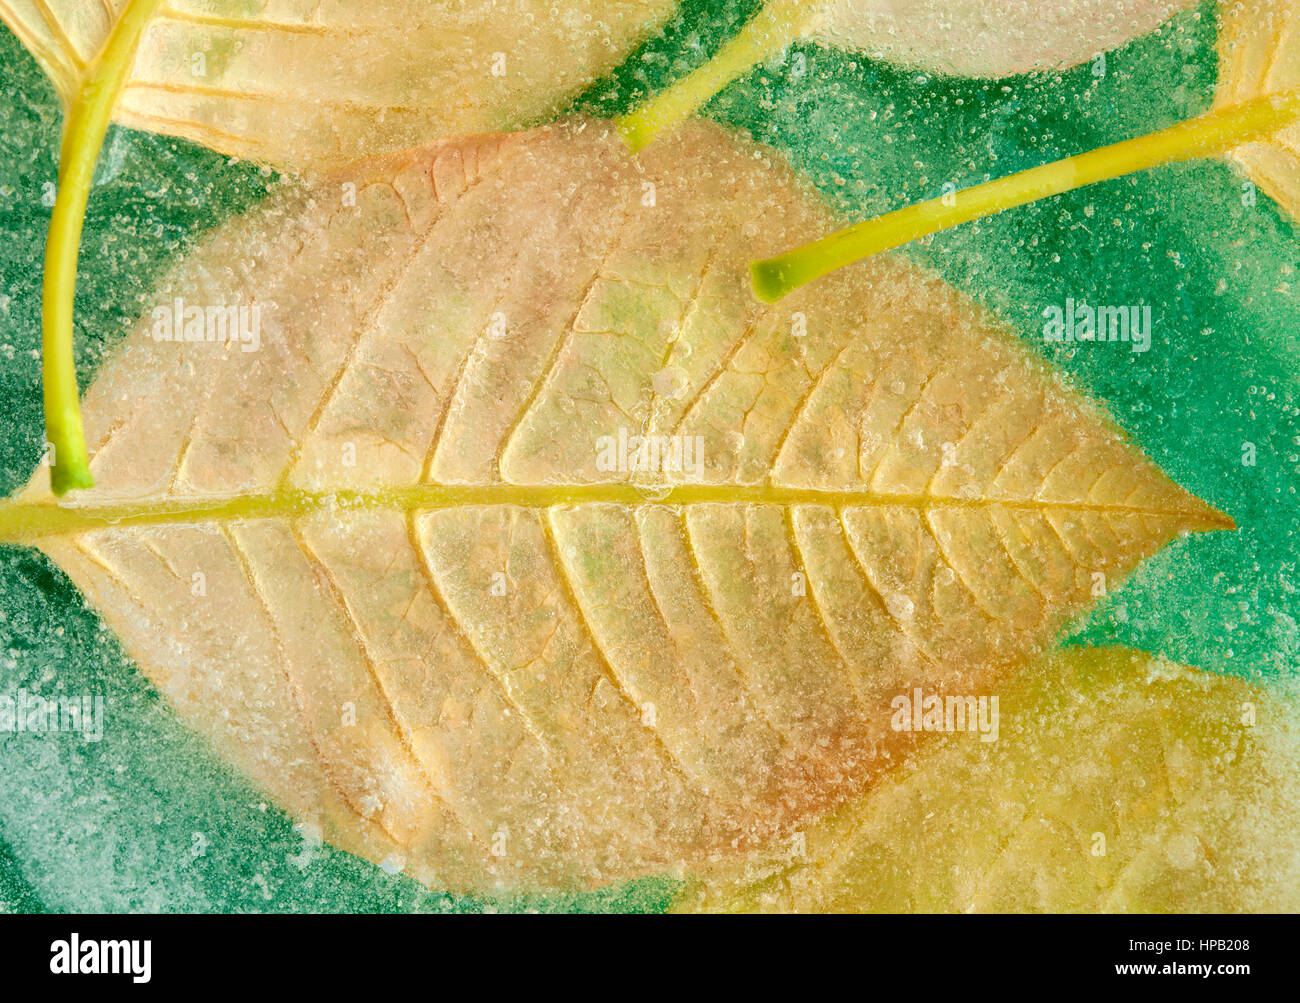 frozen flora natural background - yellow poinsettia leaves frozen into a block of ice, green background Stock Photo